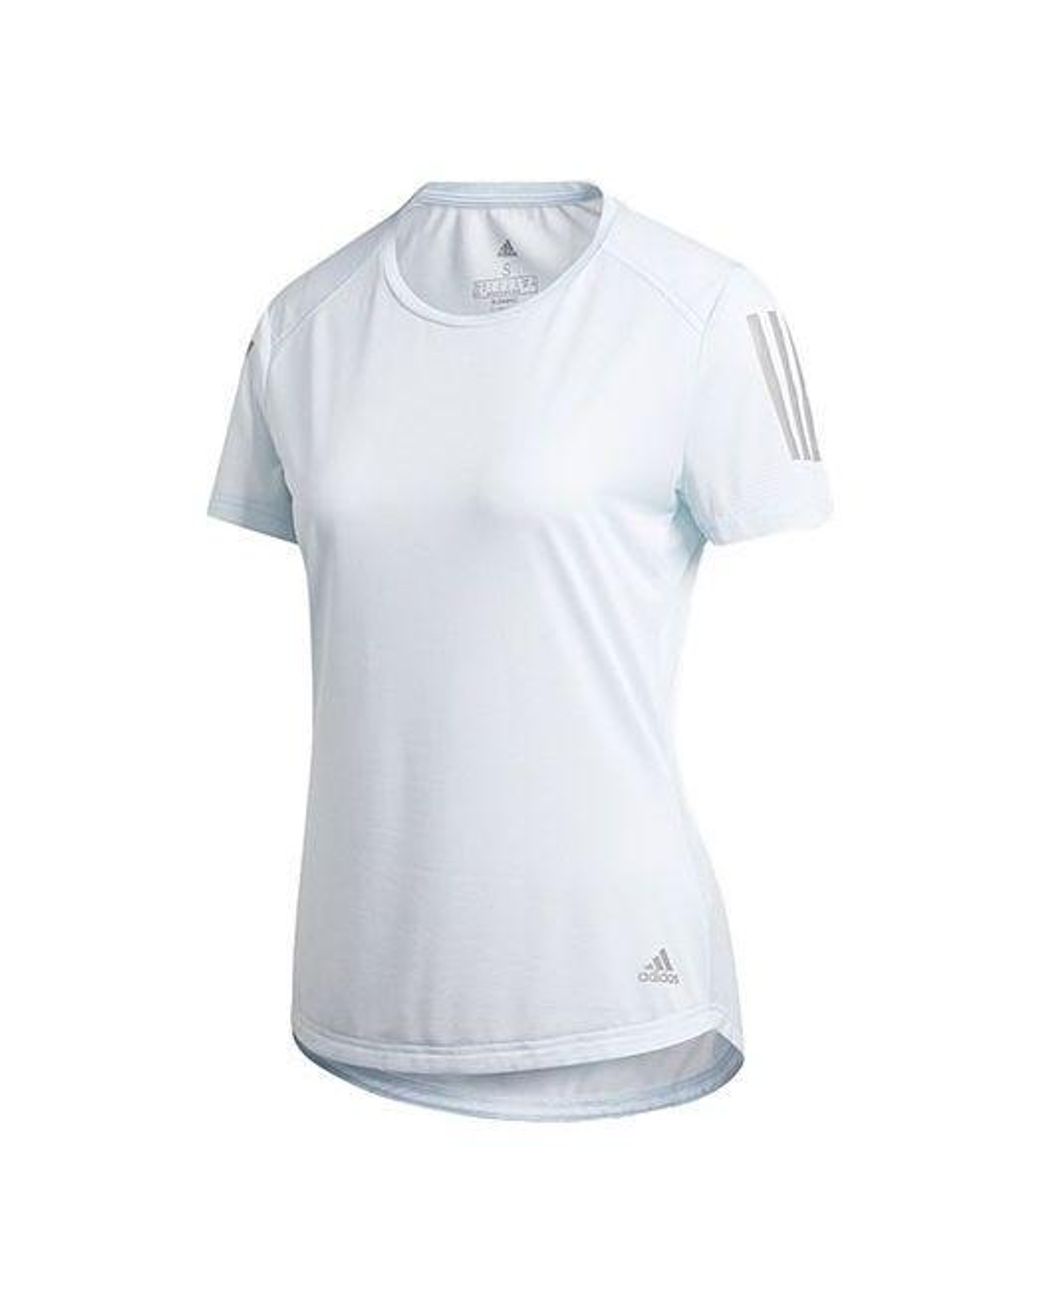 adidas Own The Run Lyst Tee in T Blue 